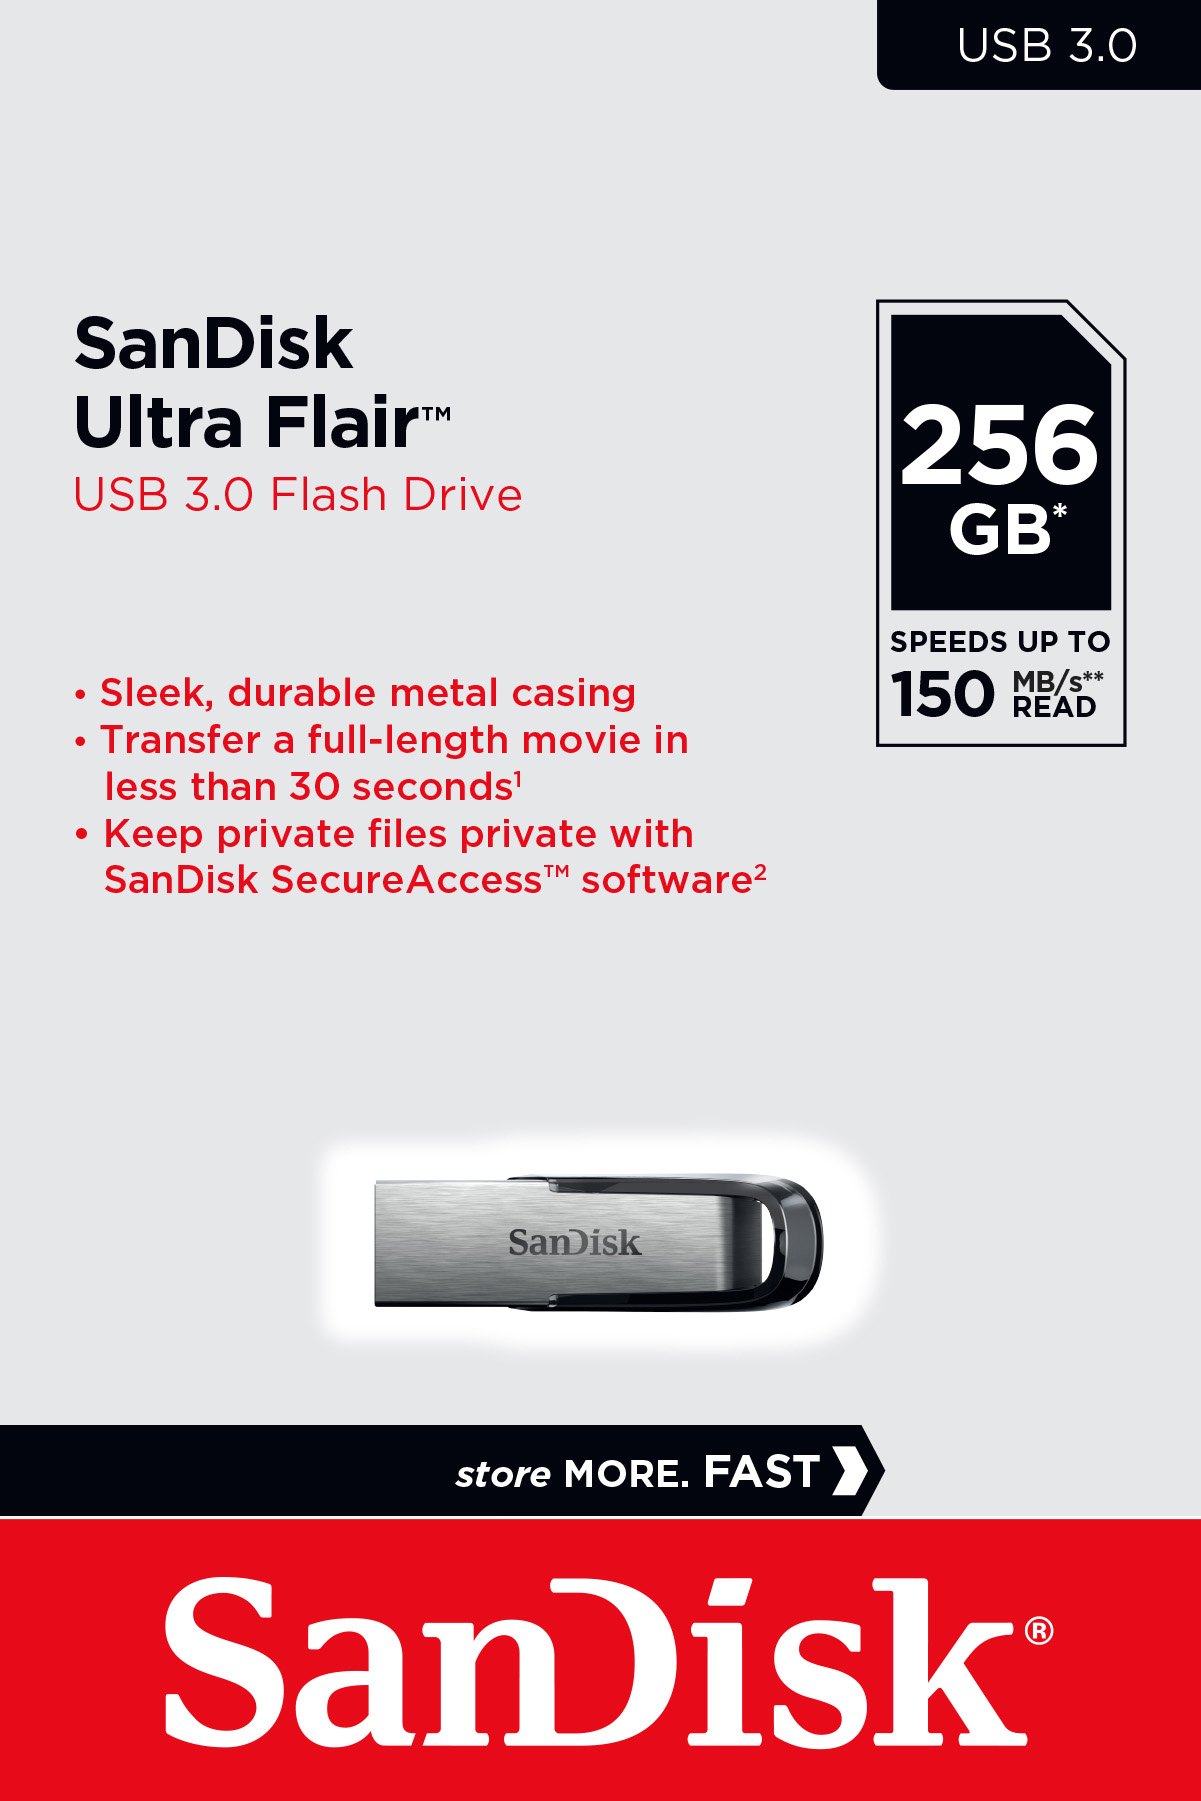 Sandisk USB 3.0 Stick 256GB, Ultra Flair Typ-A, (R) 150MB/s, SecureAccess, Retail-Blister